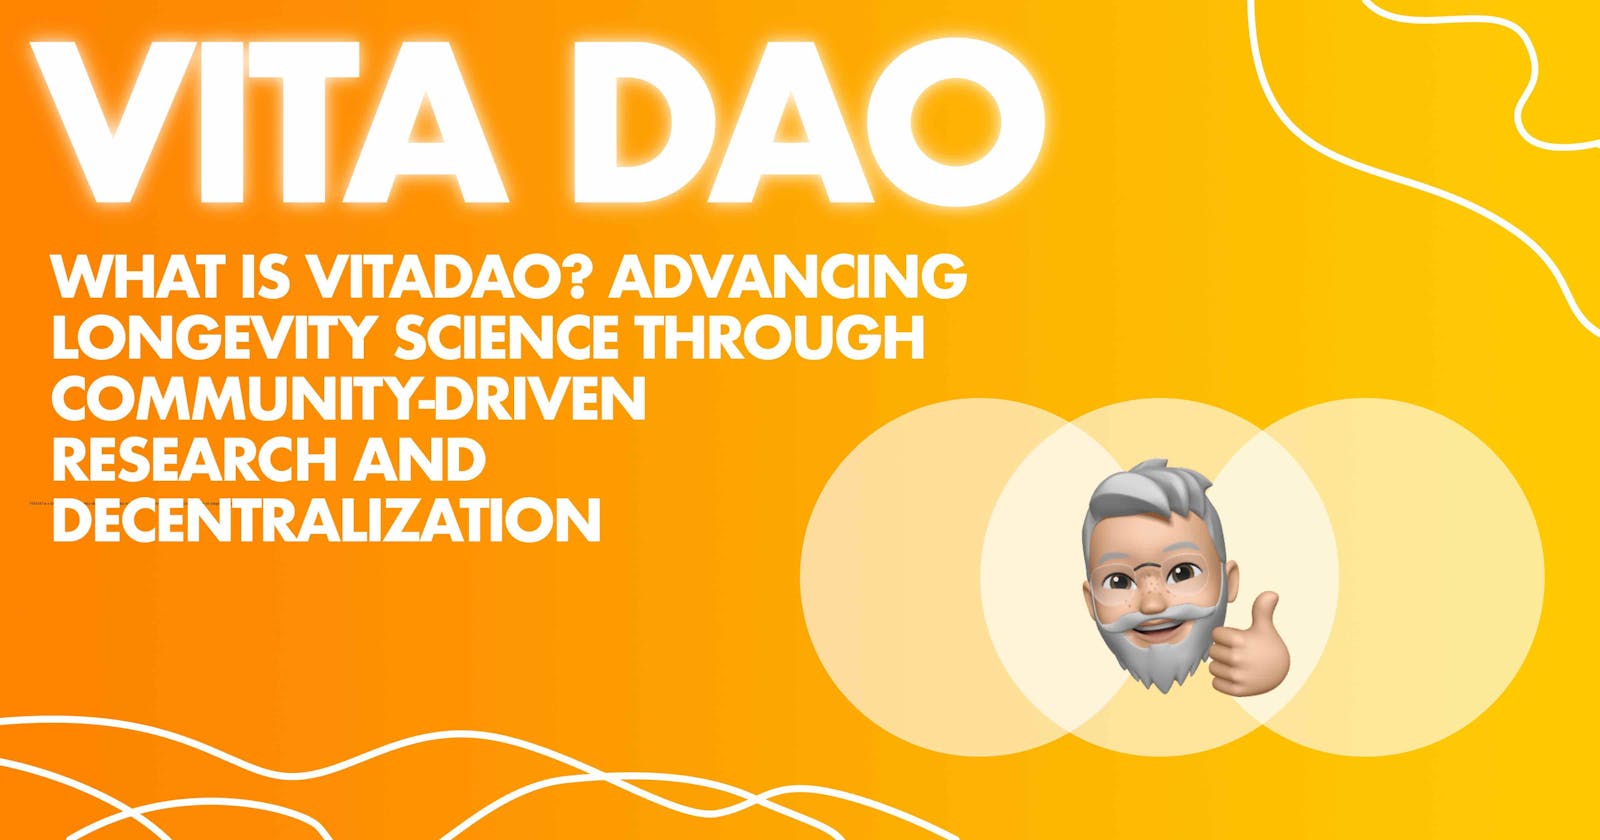 What is VitaDAO? Advancing longevity science through community-driven research and decentralization